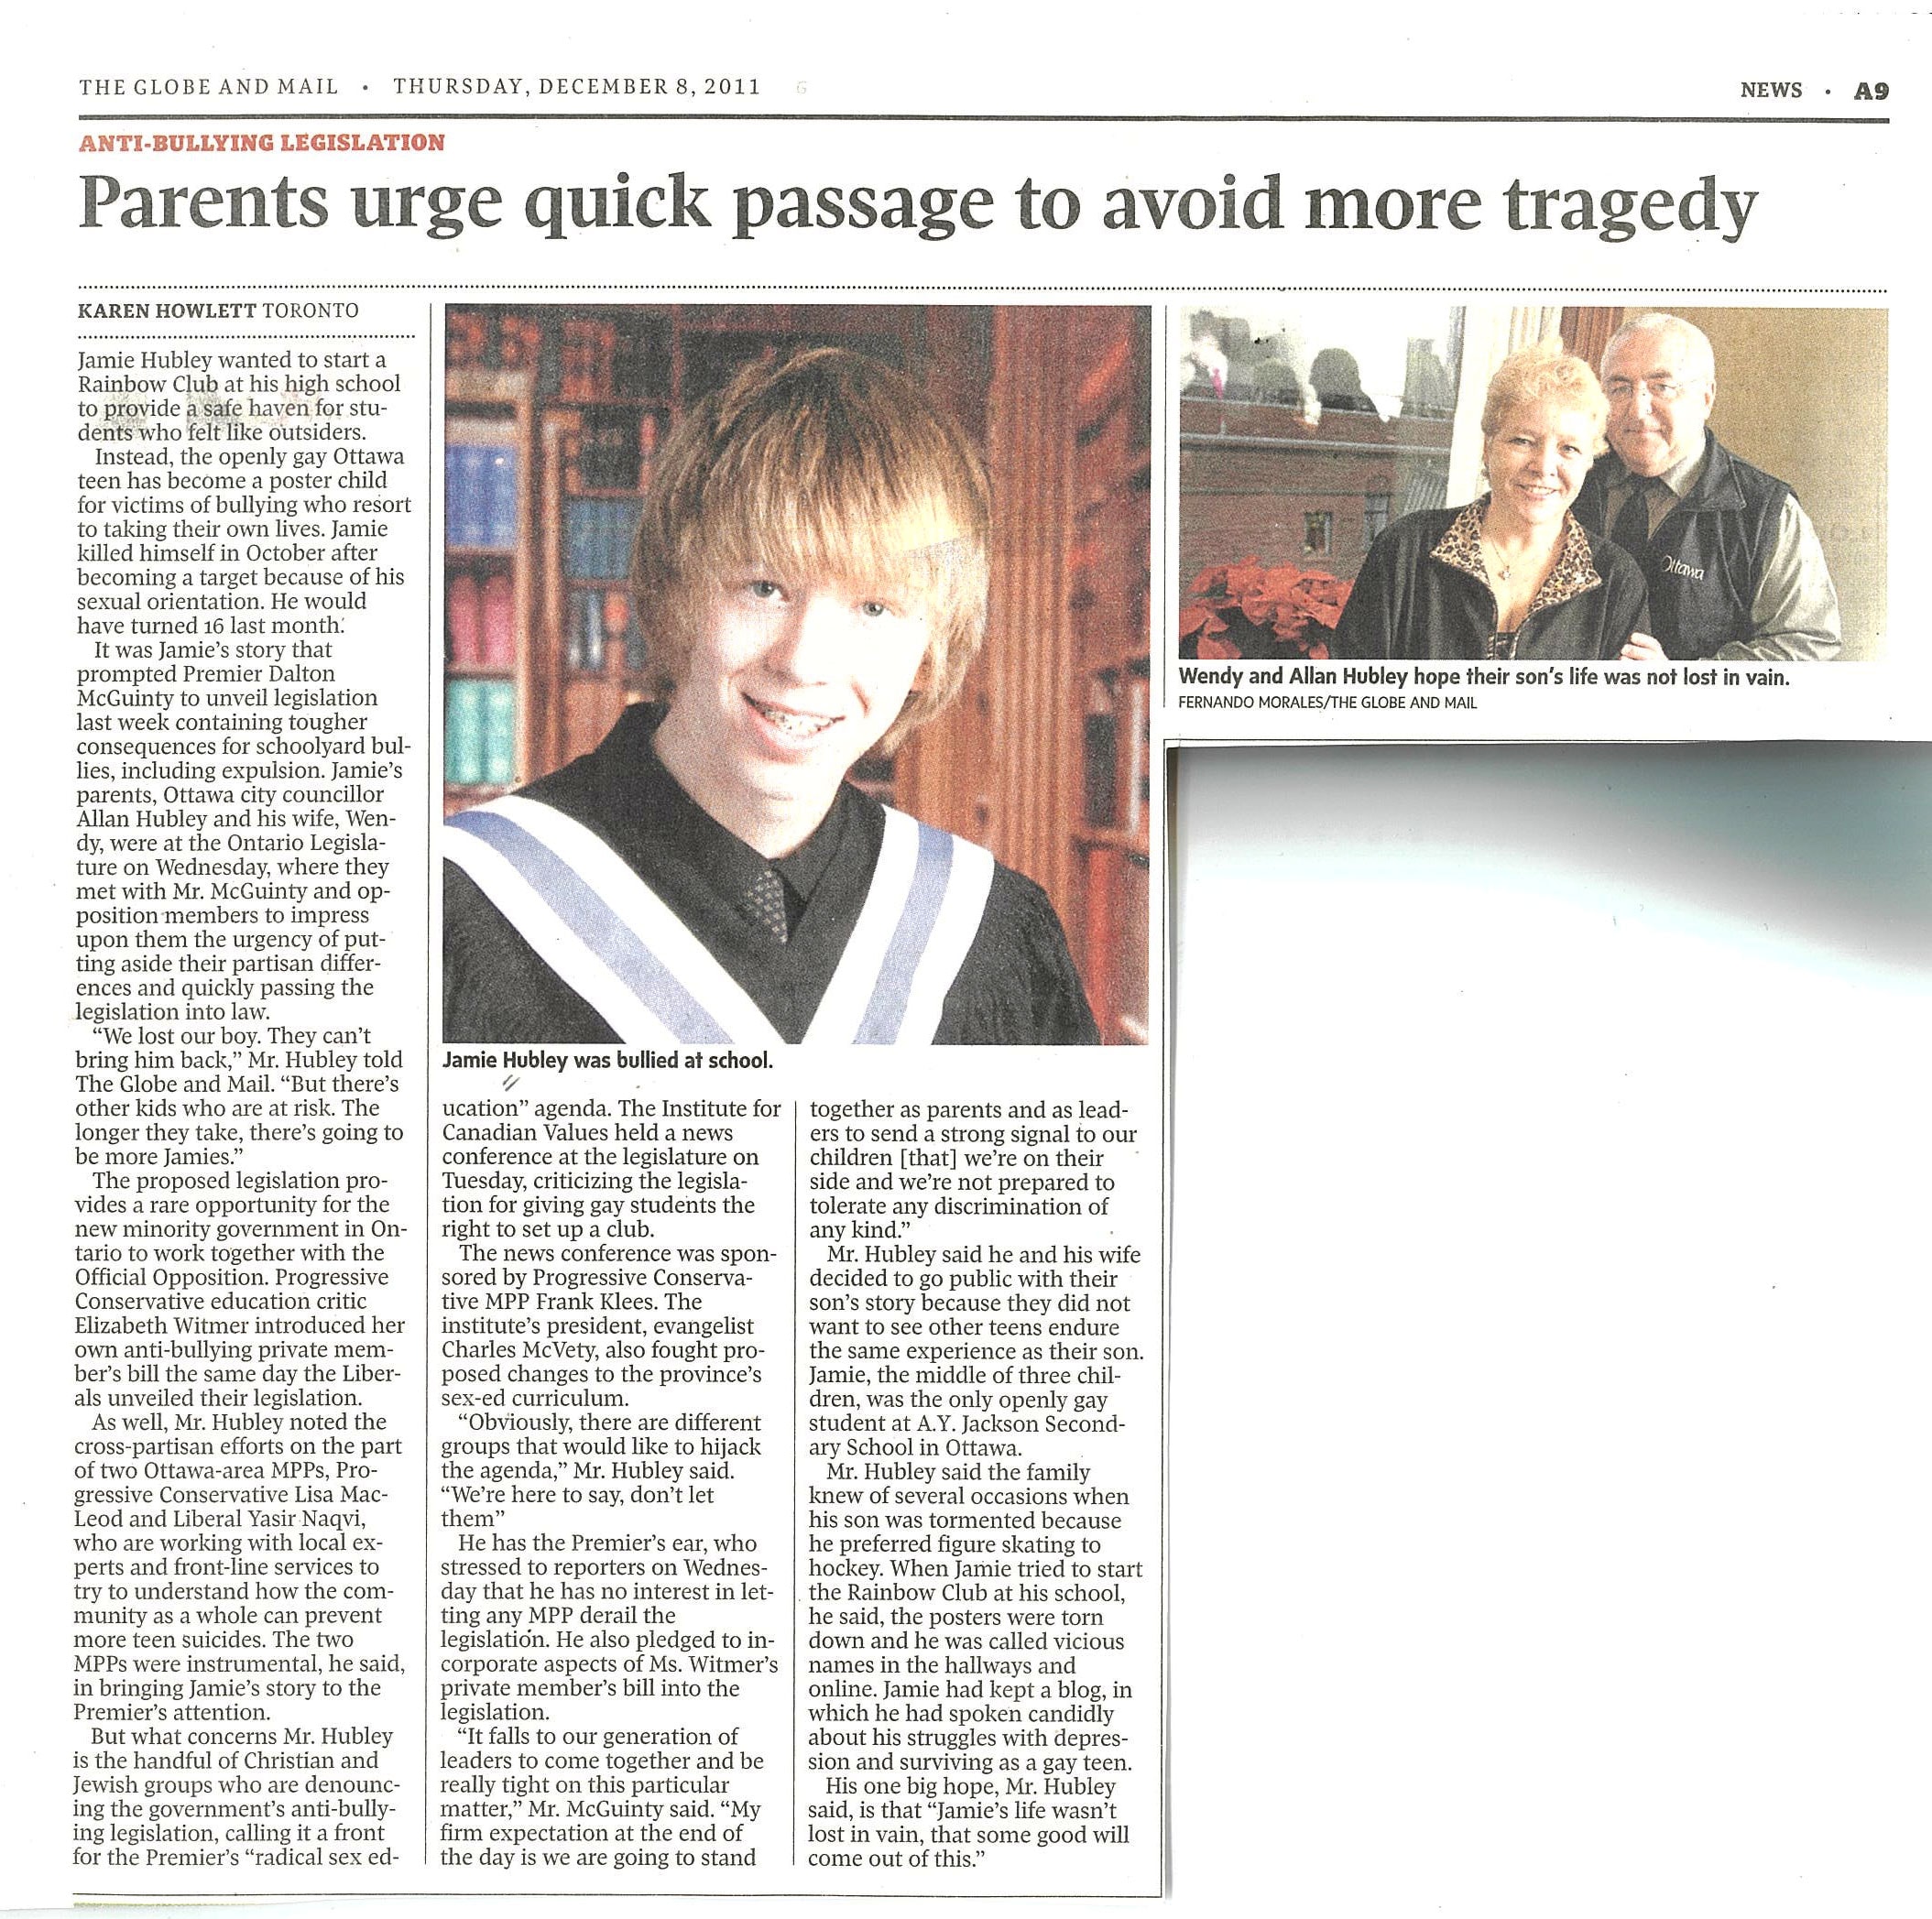 Clipping of a newspaper article with a photo of a teenager with shaggy hair in a graduation gown, and a separate photo of a middle-aged couple